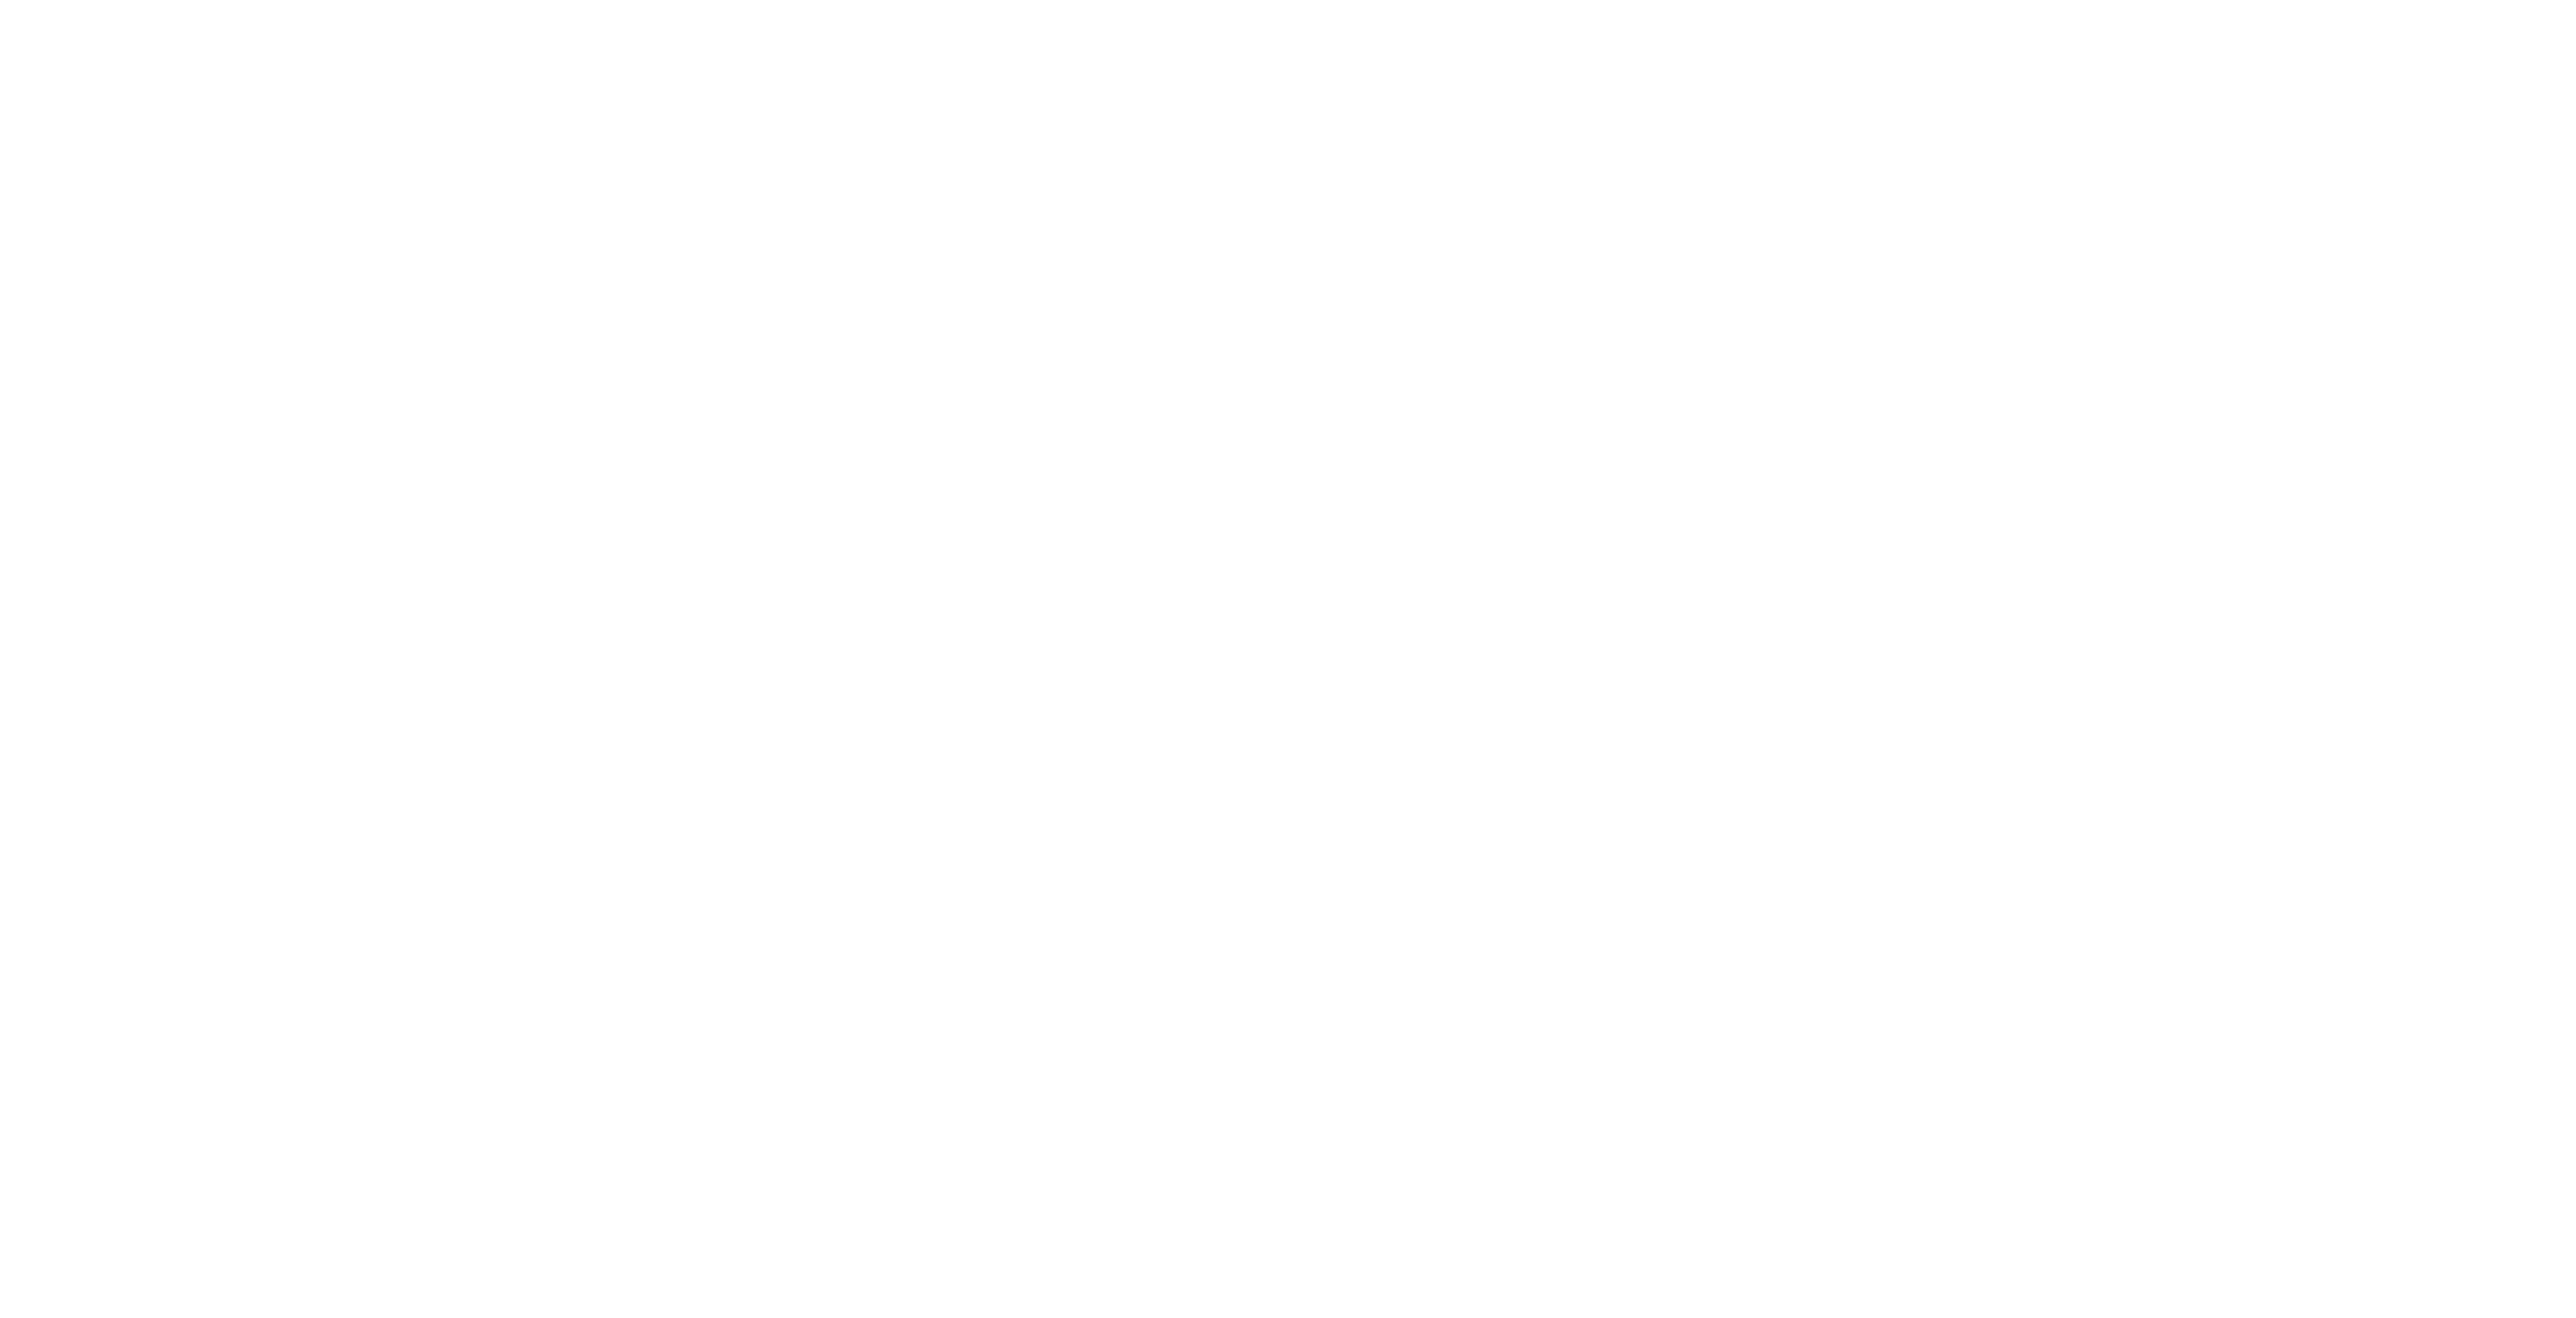 Zepeda Law Firm